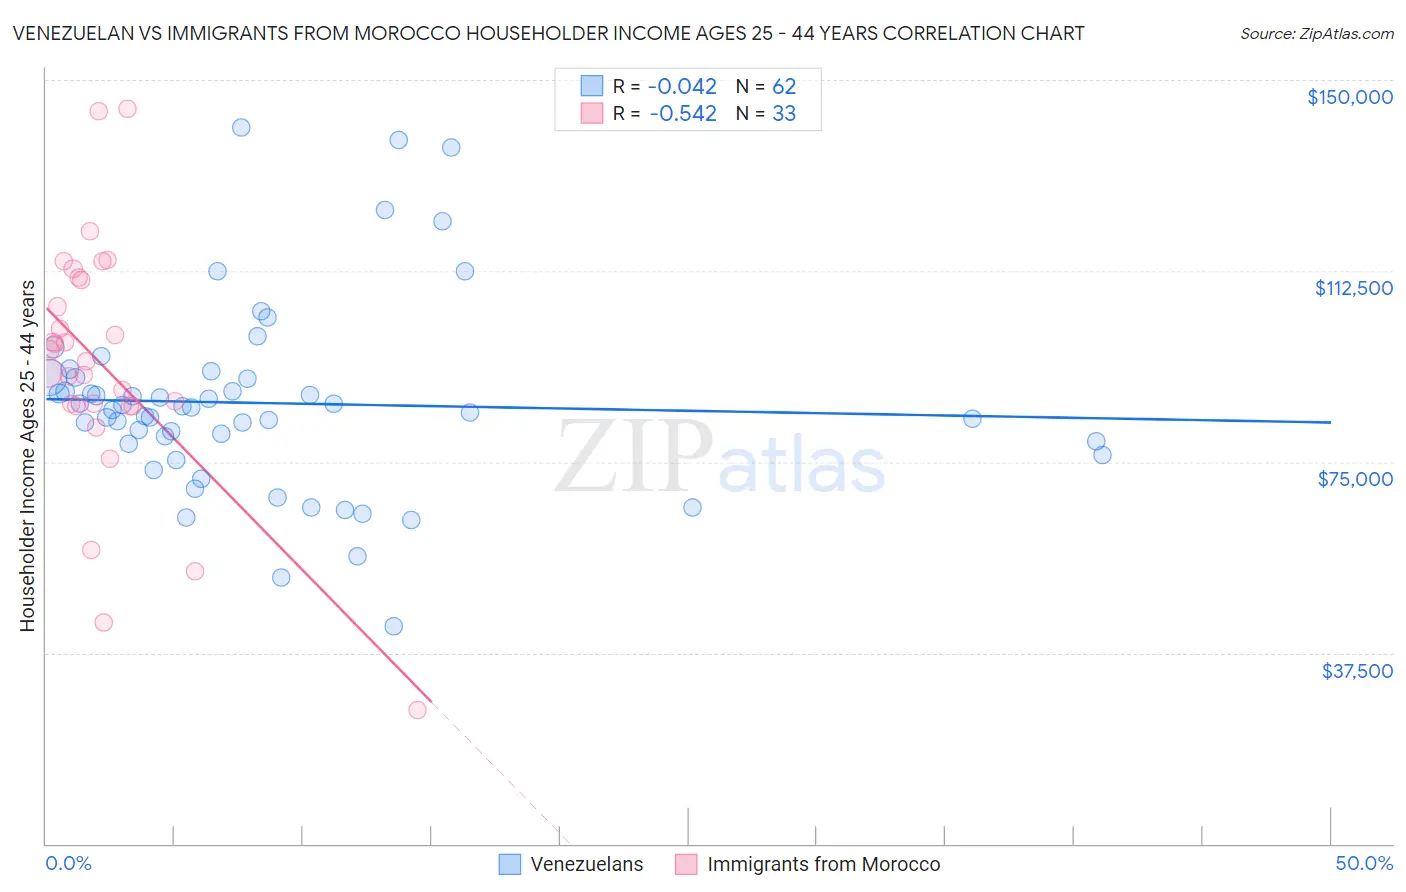 Venezuelan vs Immigrants from Morocco Householder Income Ages 25 - 44 years